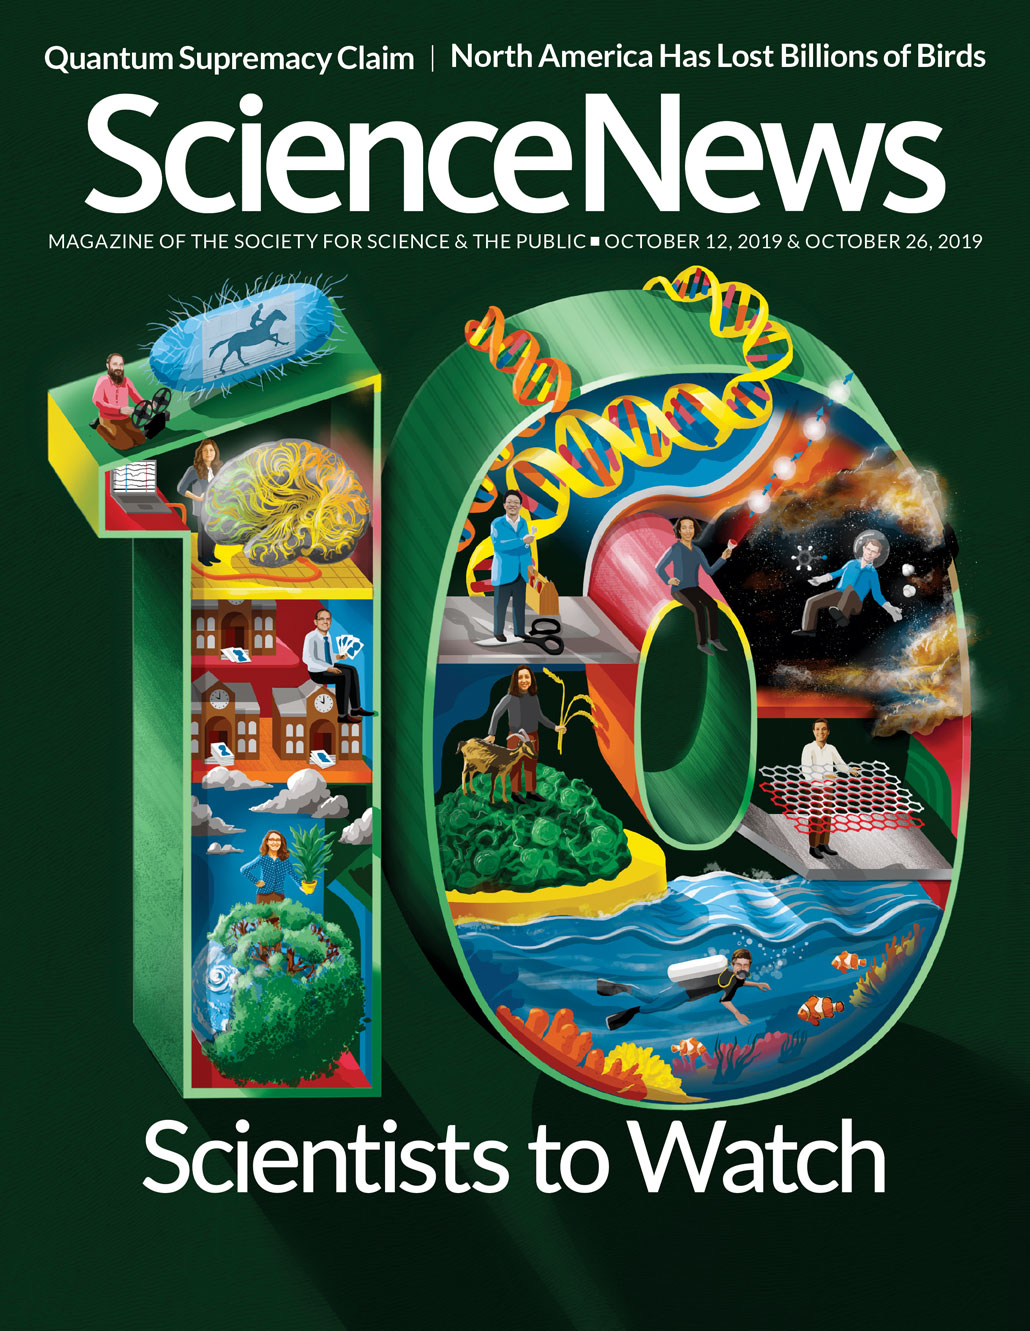 Nraos Brett Mcguire Part Of Science News 10 Scientists To Watch